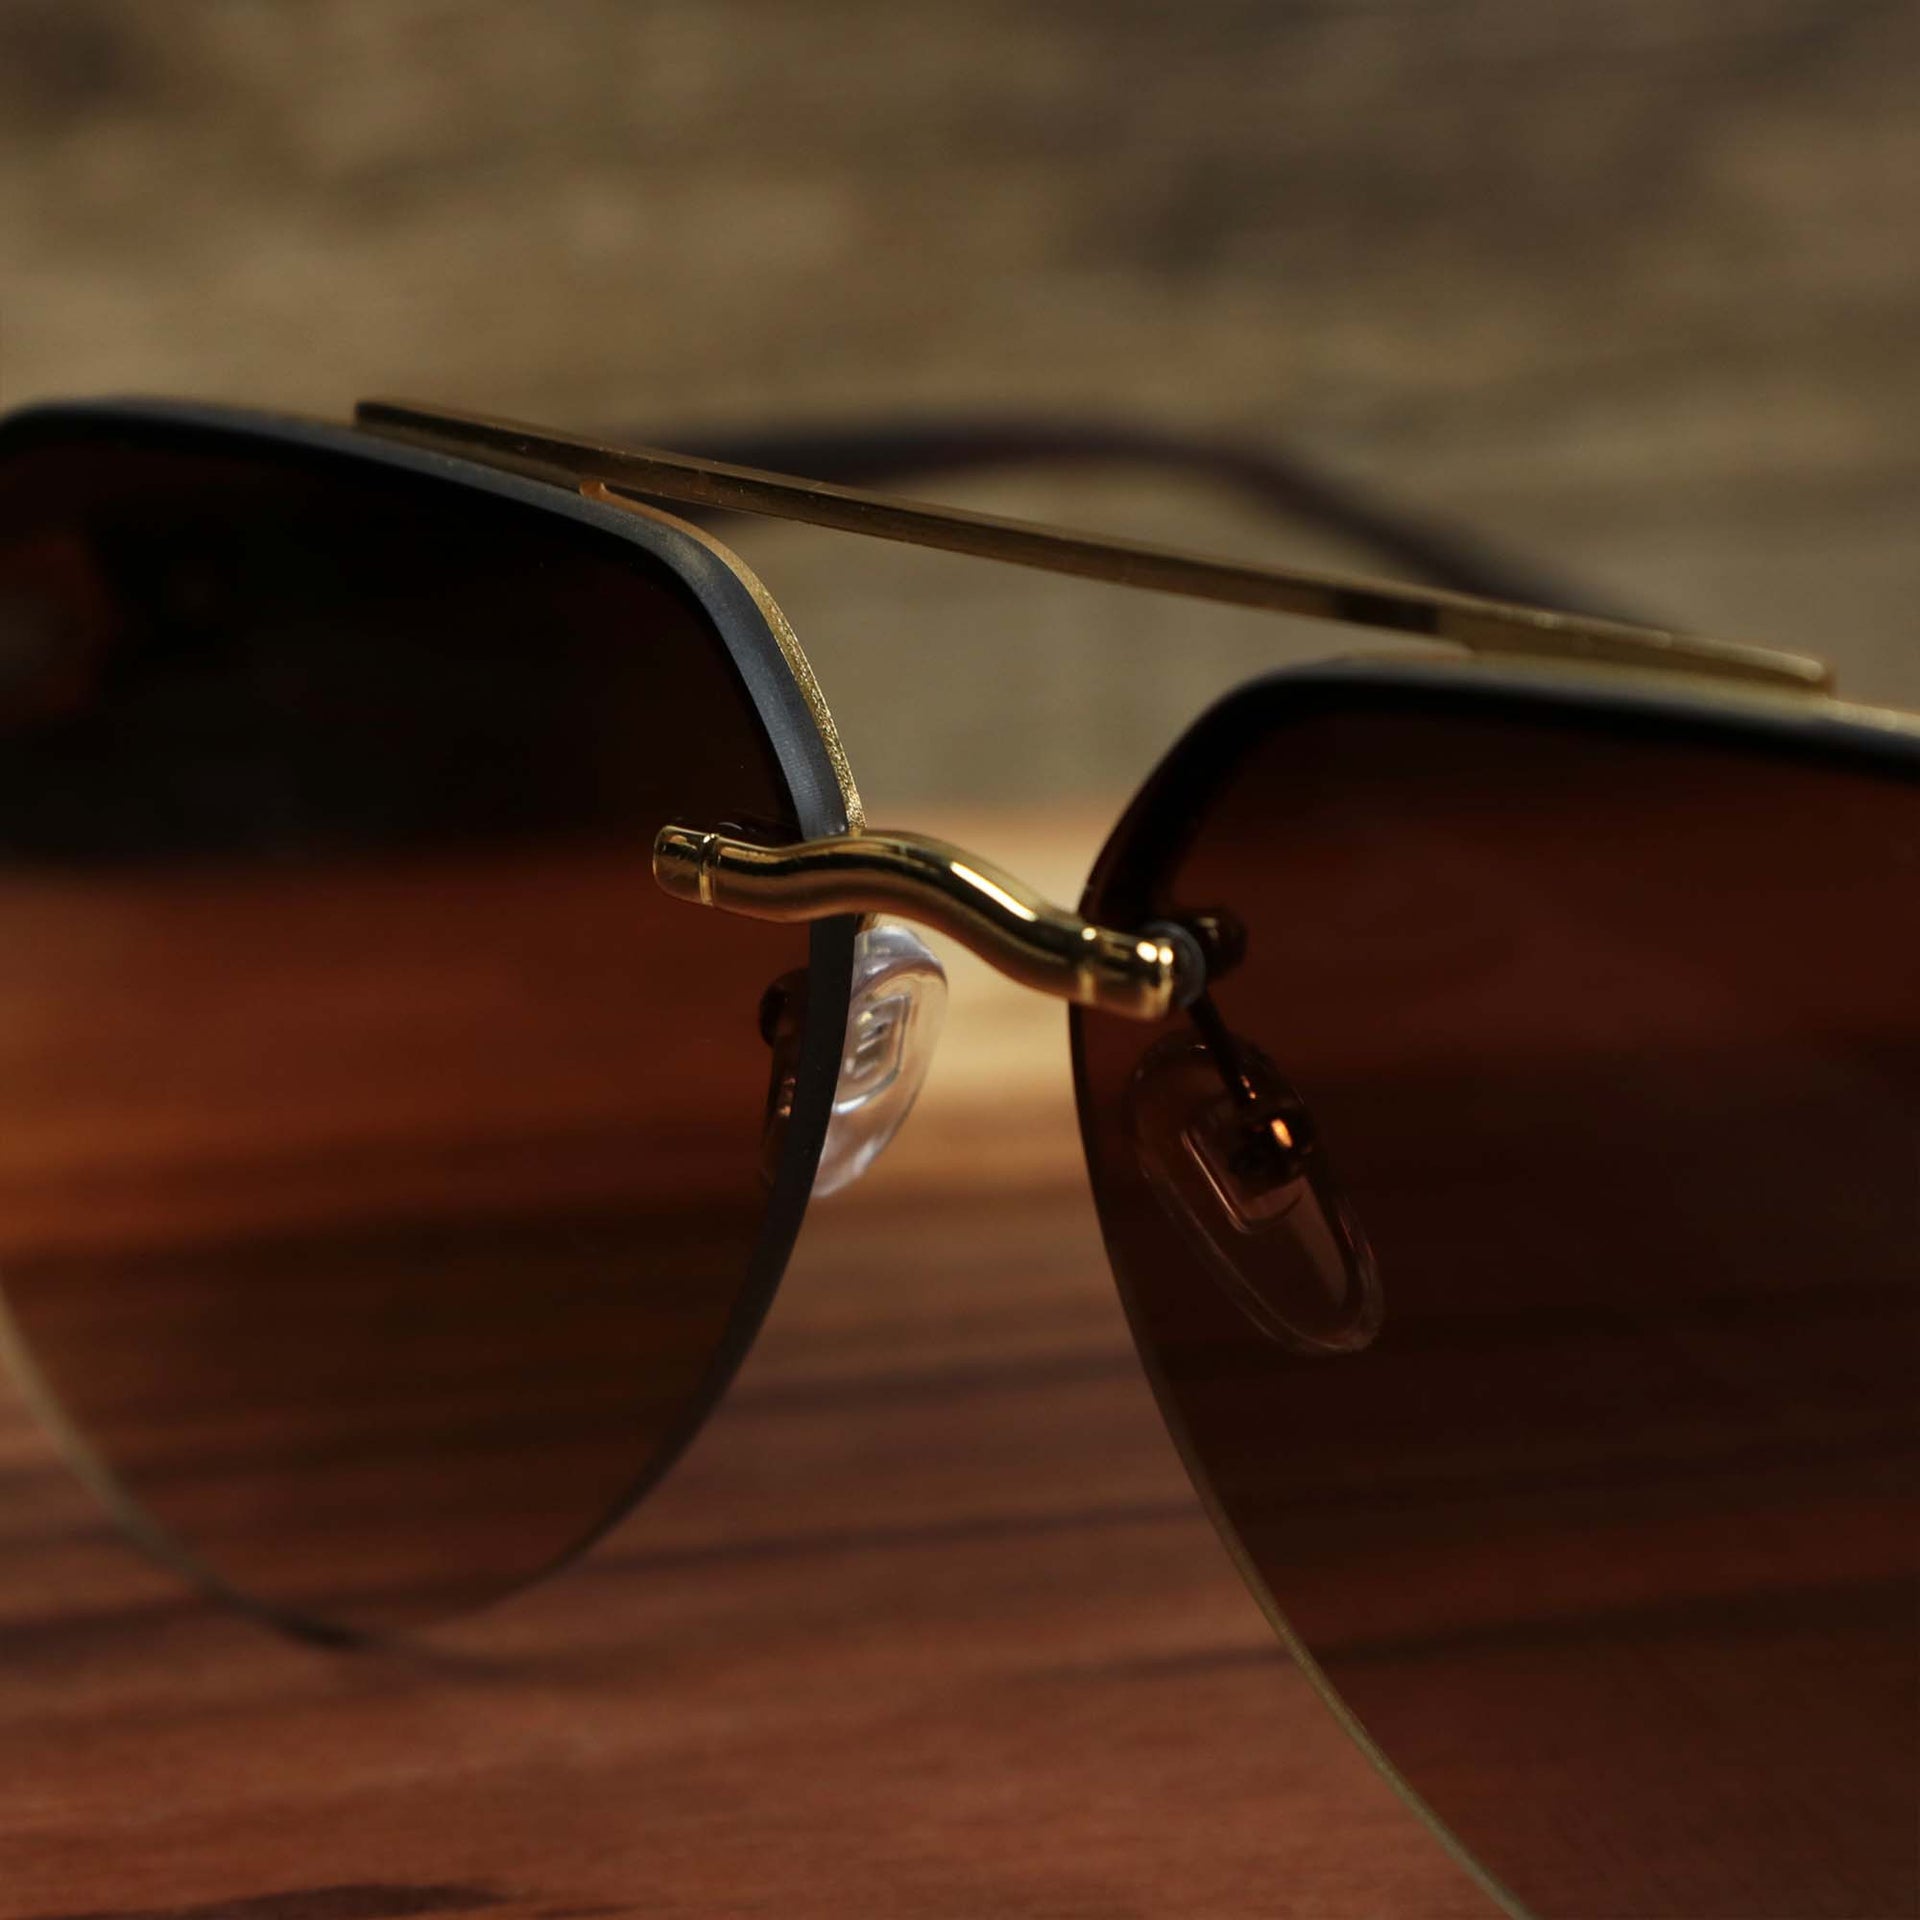 The bridge of the Round Aviator Frames Brown Gradient Lens Sunglasses with Gold Frame